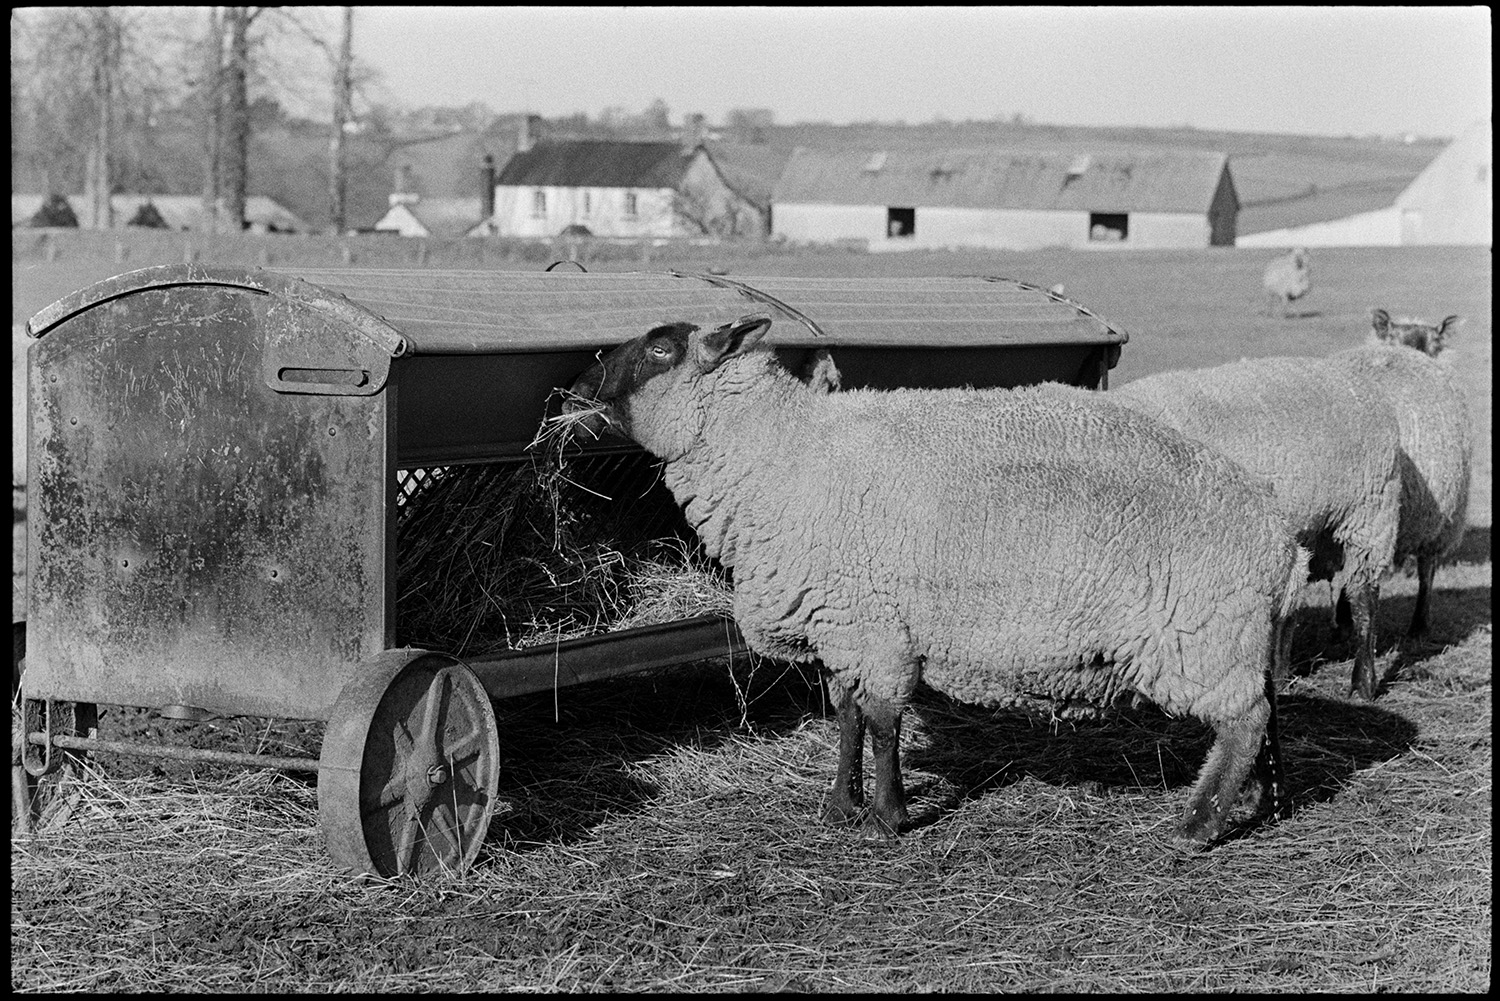 Sheep in field. <br />
[Sheep eating from a hay rack in a field at Parsonage, Iddesleigh. Farm buildings are visible in the background.]